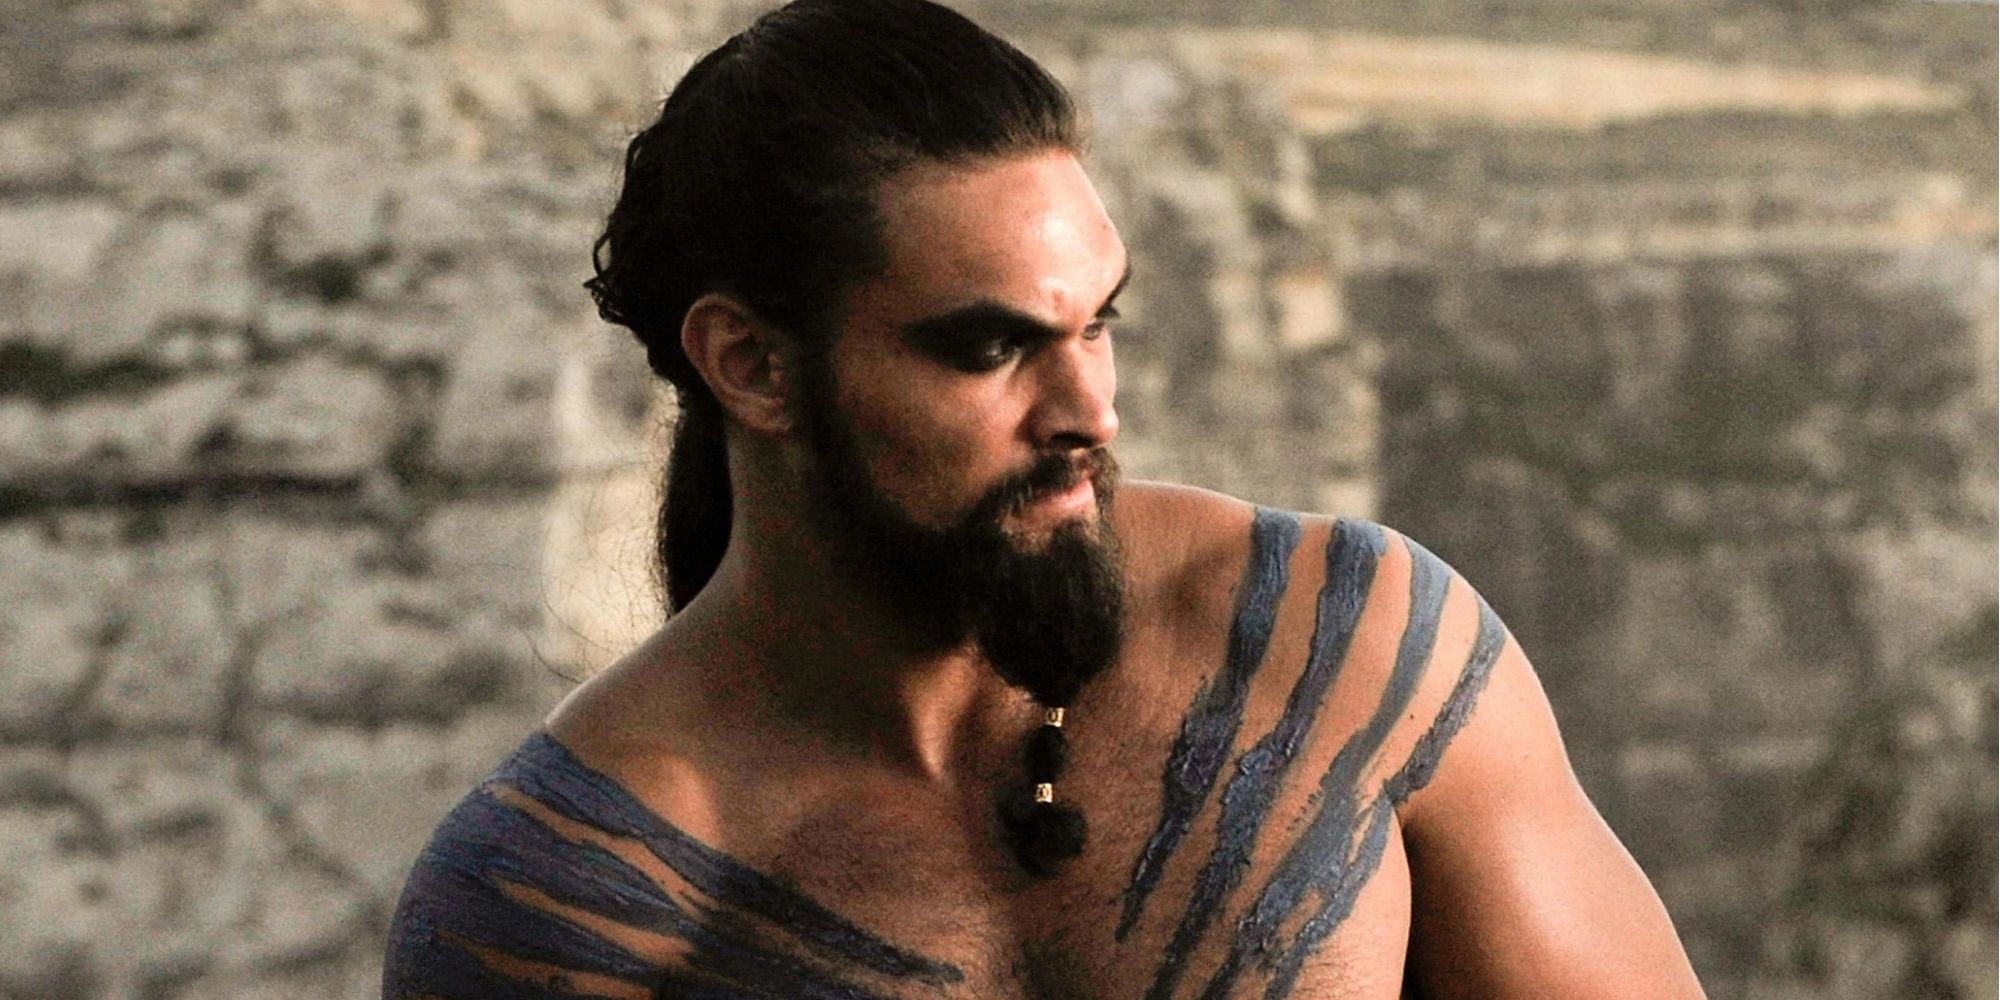 Jason Momoa as Khal Drogo in HBO's 'Game of Thrones'